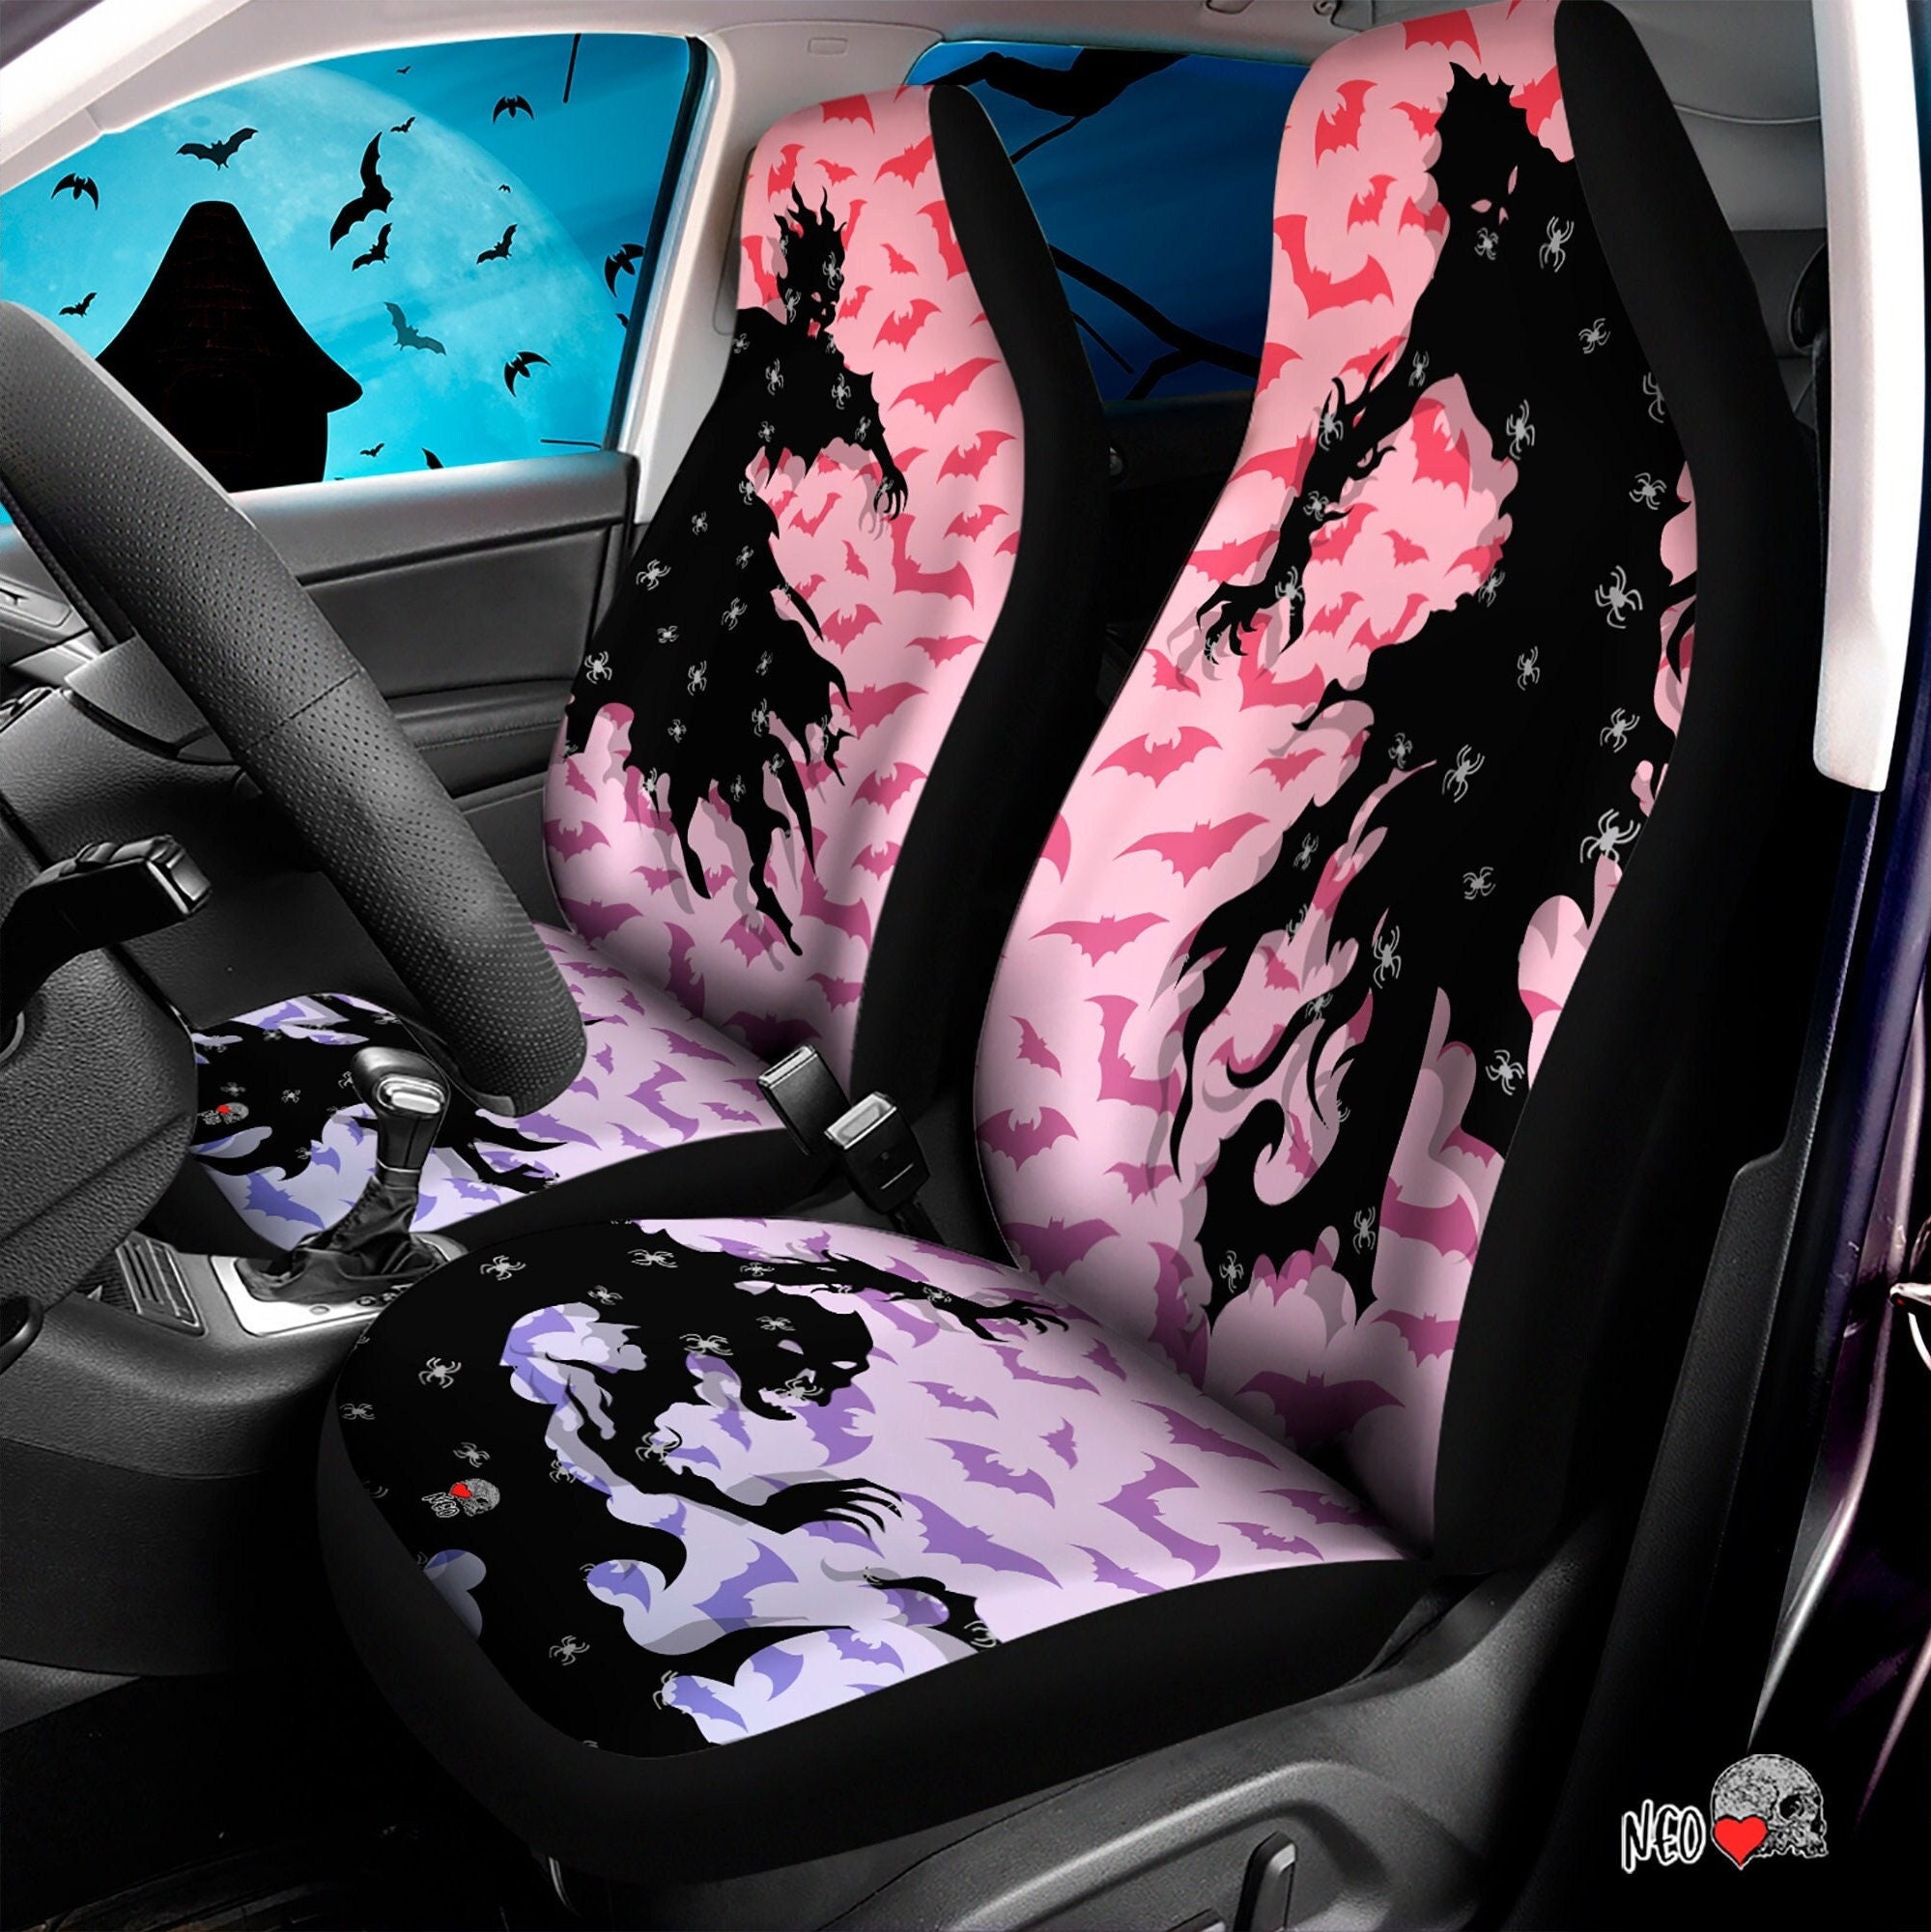 Pastel Goth Bats Car Seats Covers, Grunge Gothic Car Seats Protector,  Halloween Vamp Car Accessories, Bat Swarm Witchy Halloween 